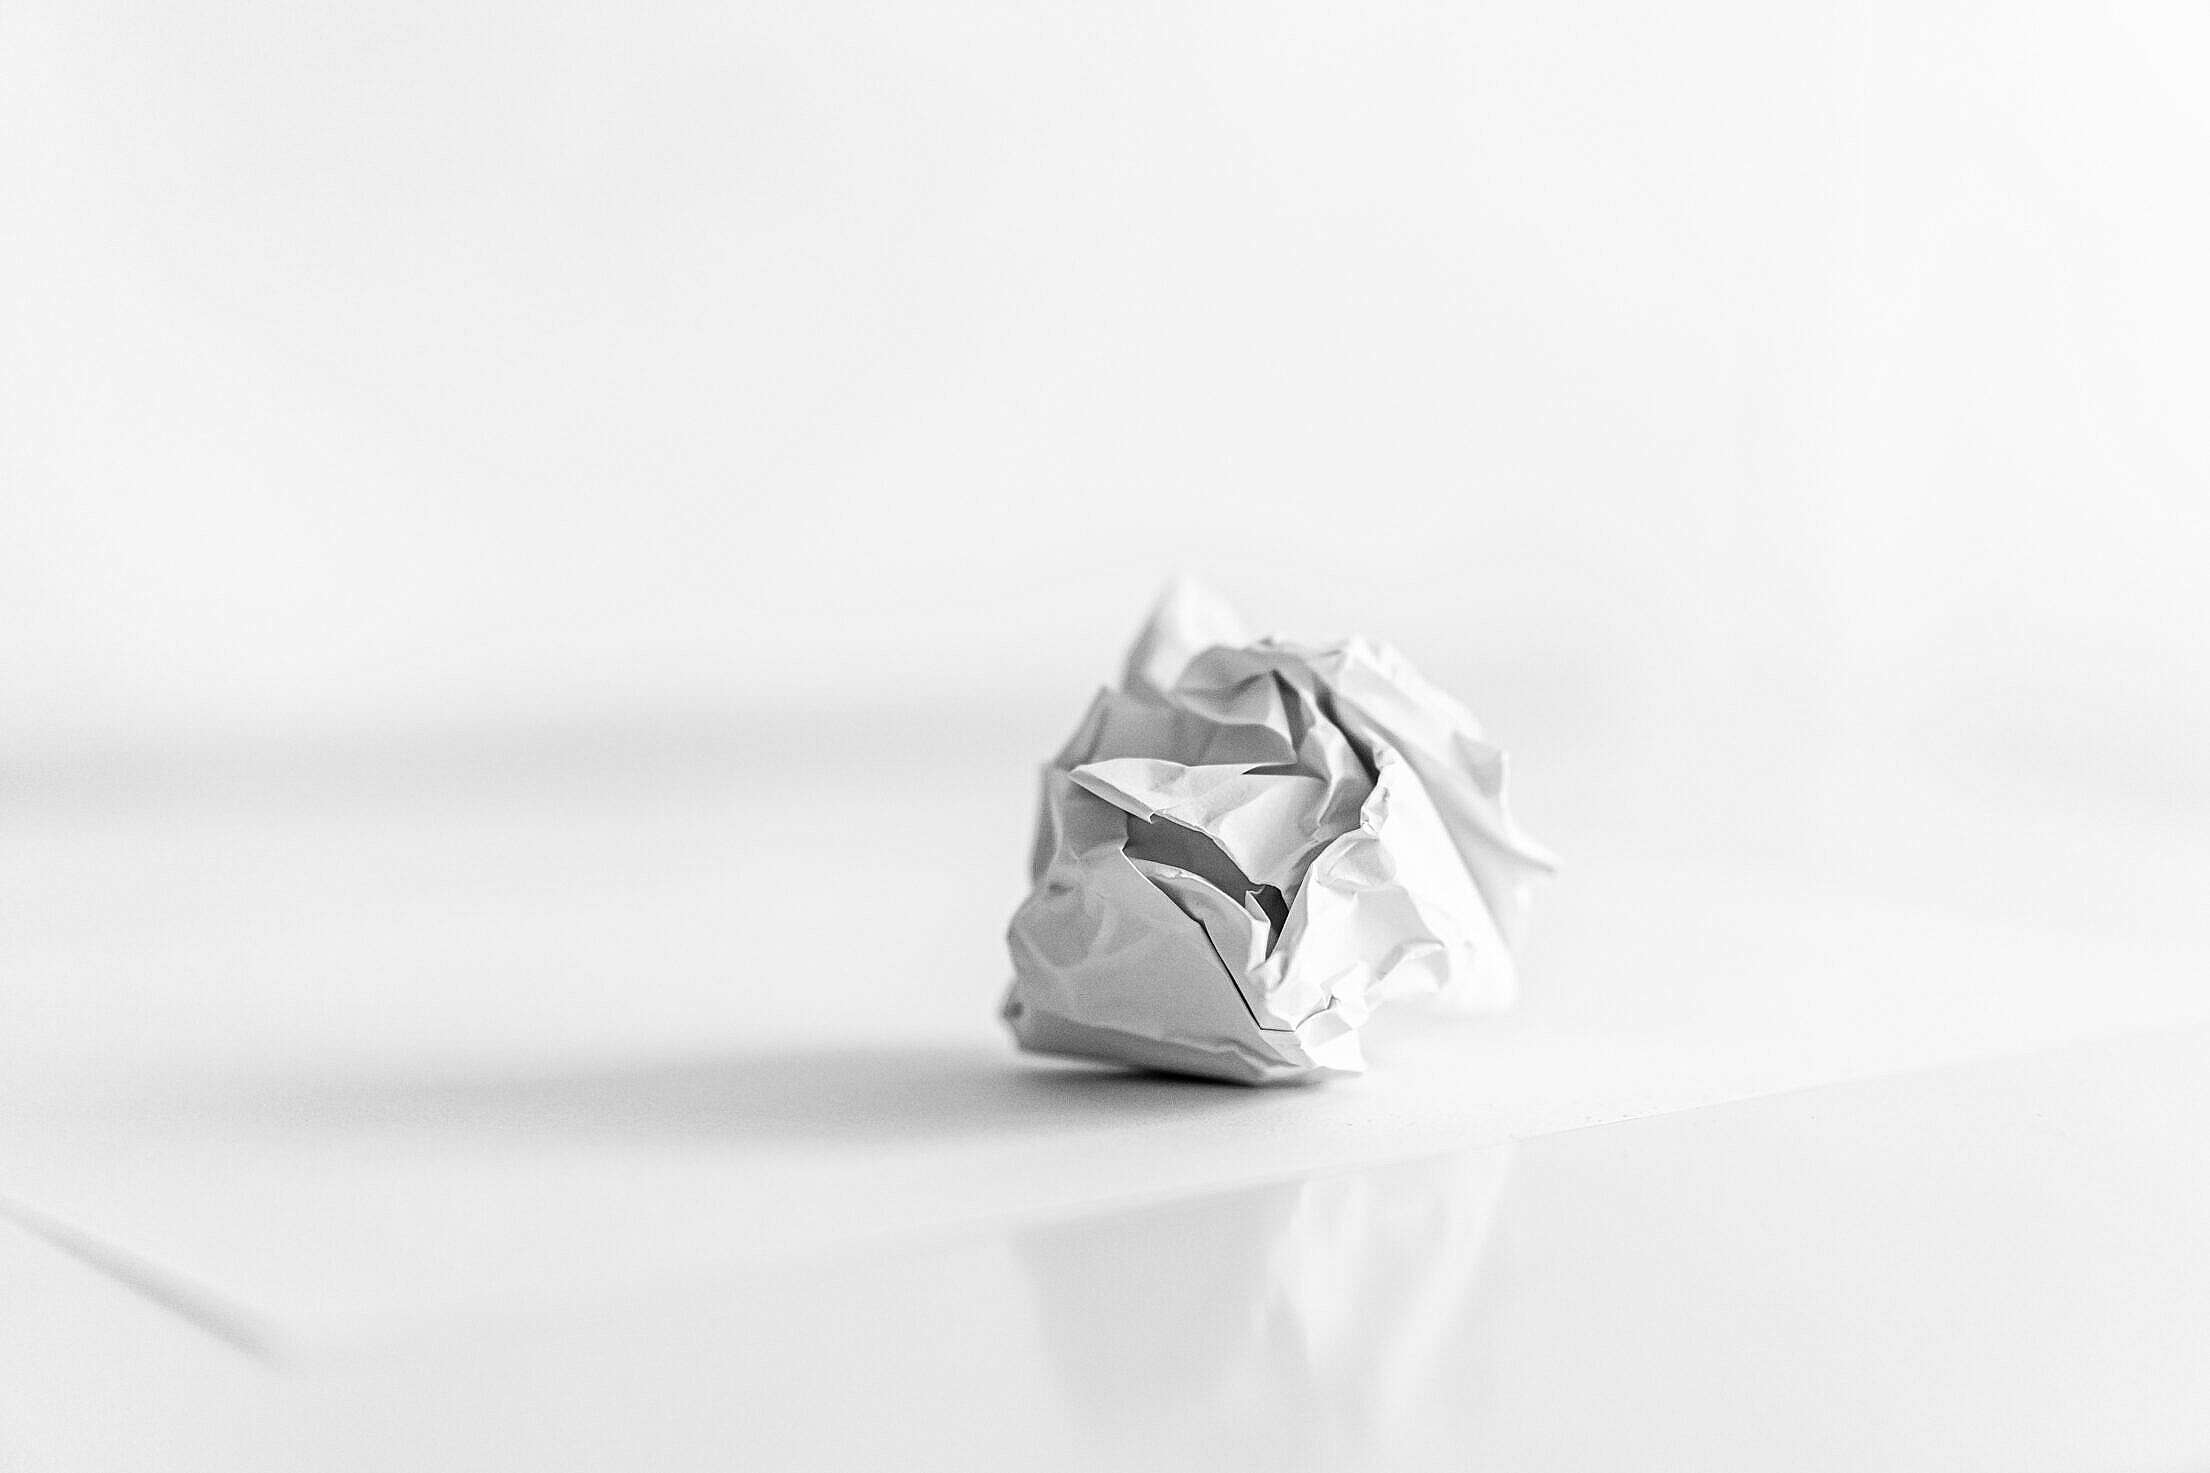 Crumpled Paper Ball on the Table Free Stock Photo